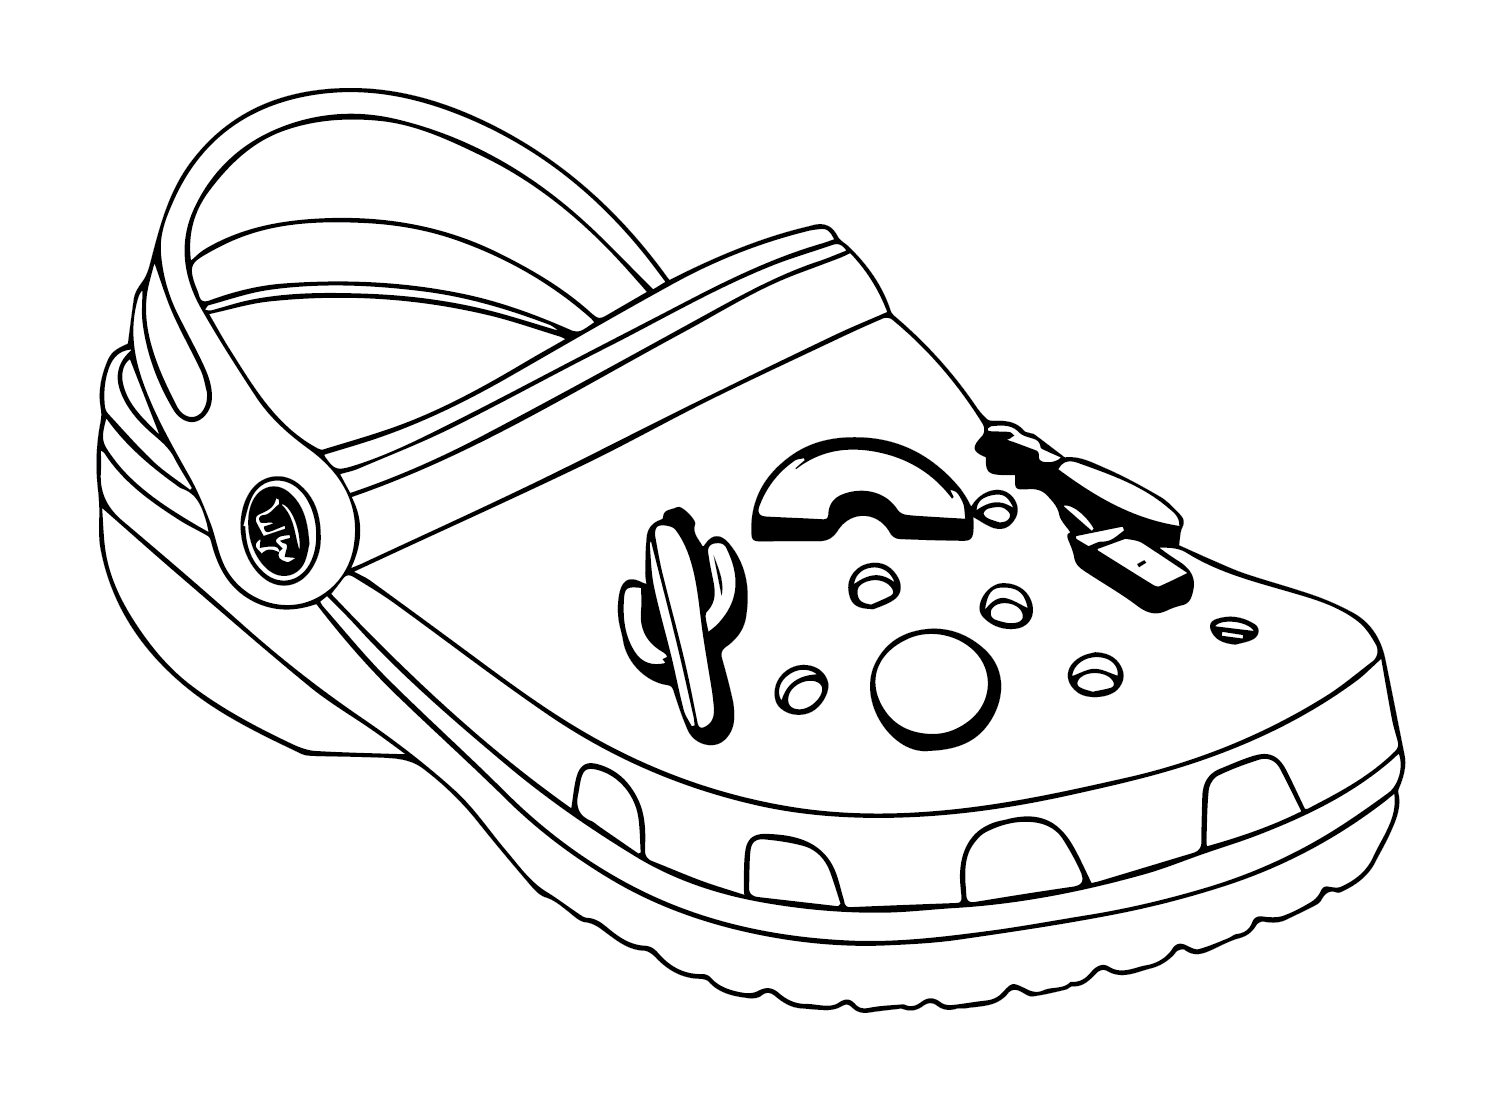 Crocs Coloring Pages - Coloring Home